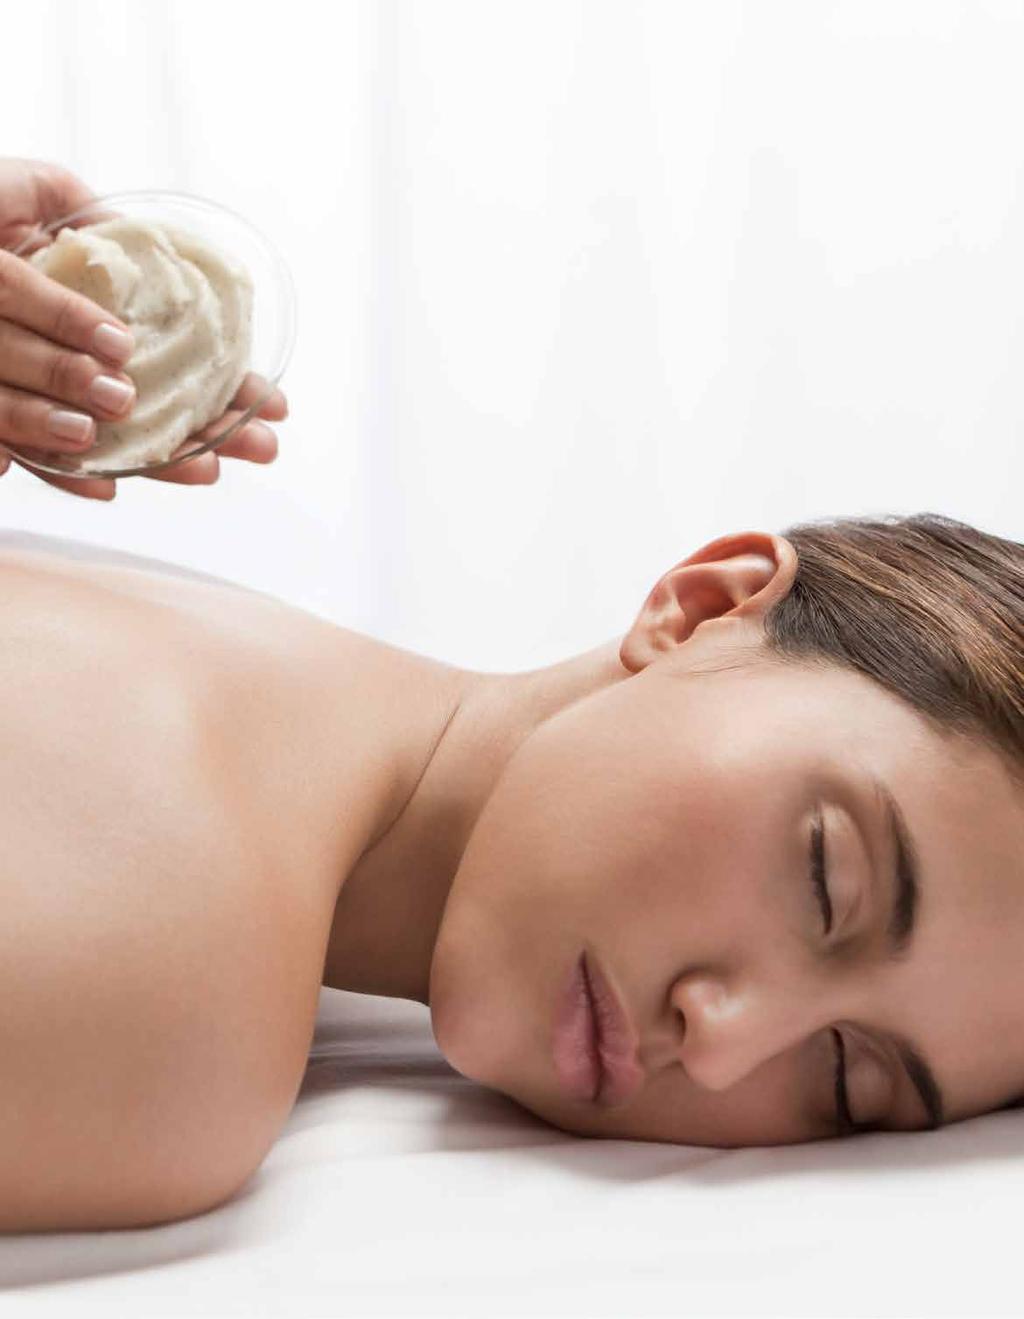 Body treatments NOHÈM ENERGETIC MASSAGE 50 mn 84 WITH CHINESE AND INDONESIAN OILS Inspired by asian techniques globally recognized: slow and deep massaging, stimulation of energy points.